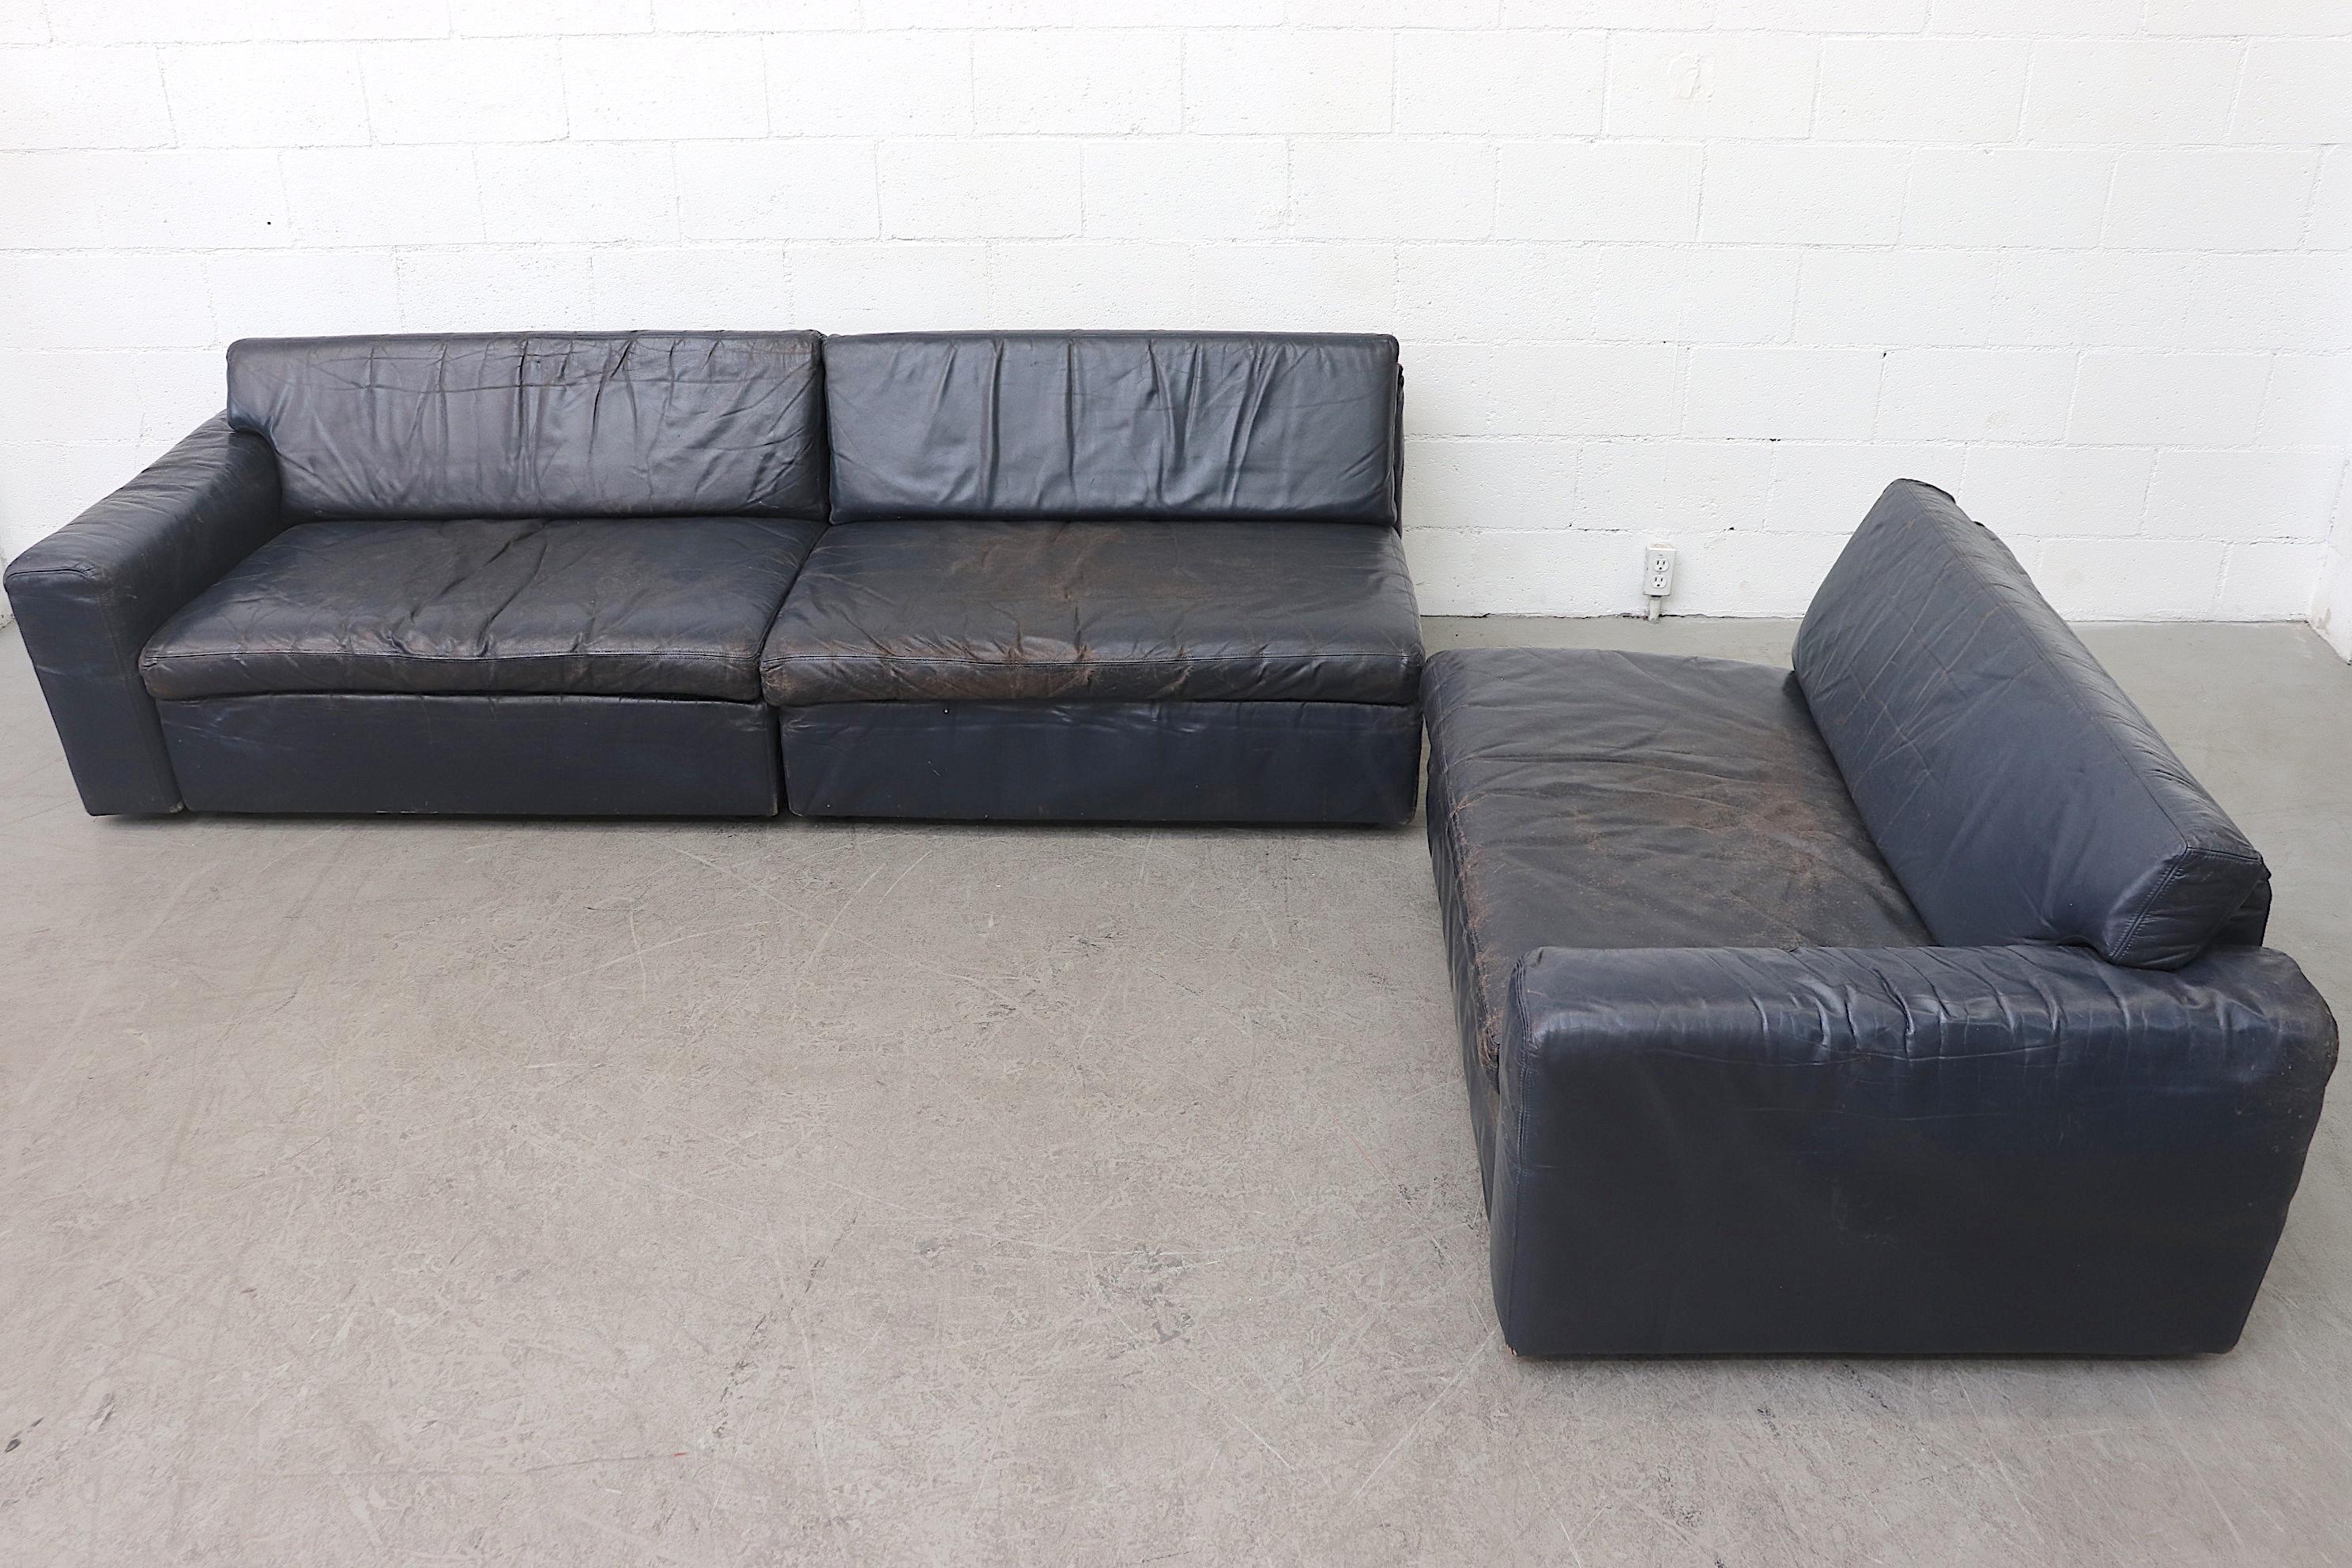 Big, bold, blue leather 3 section sofa in original condition with some visible wear, some leather repairs. Low-seat height. Perfect for casual lounging.